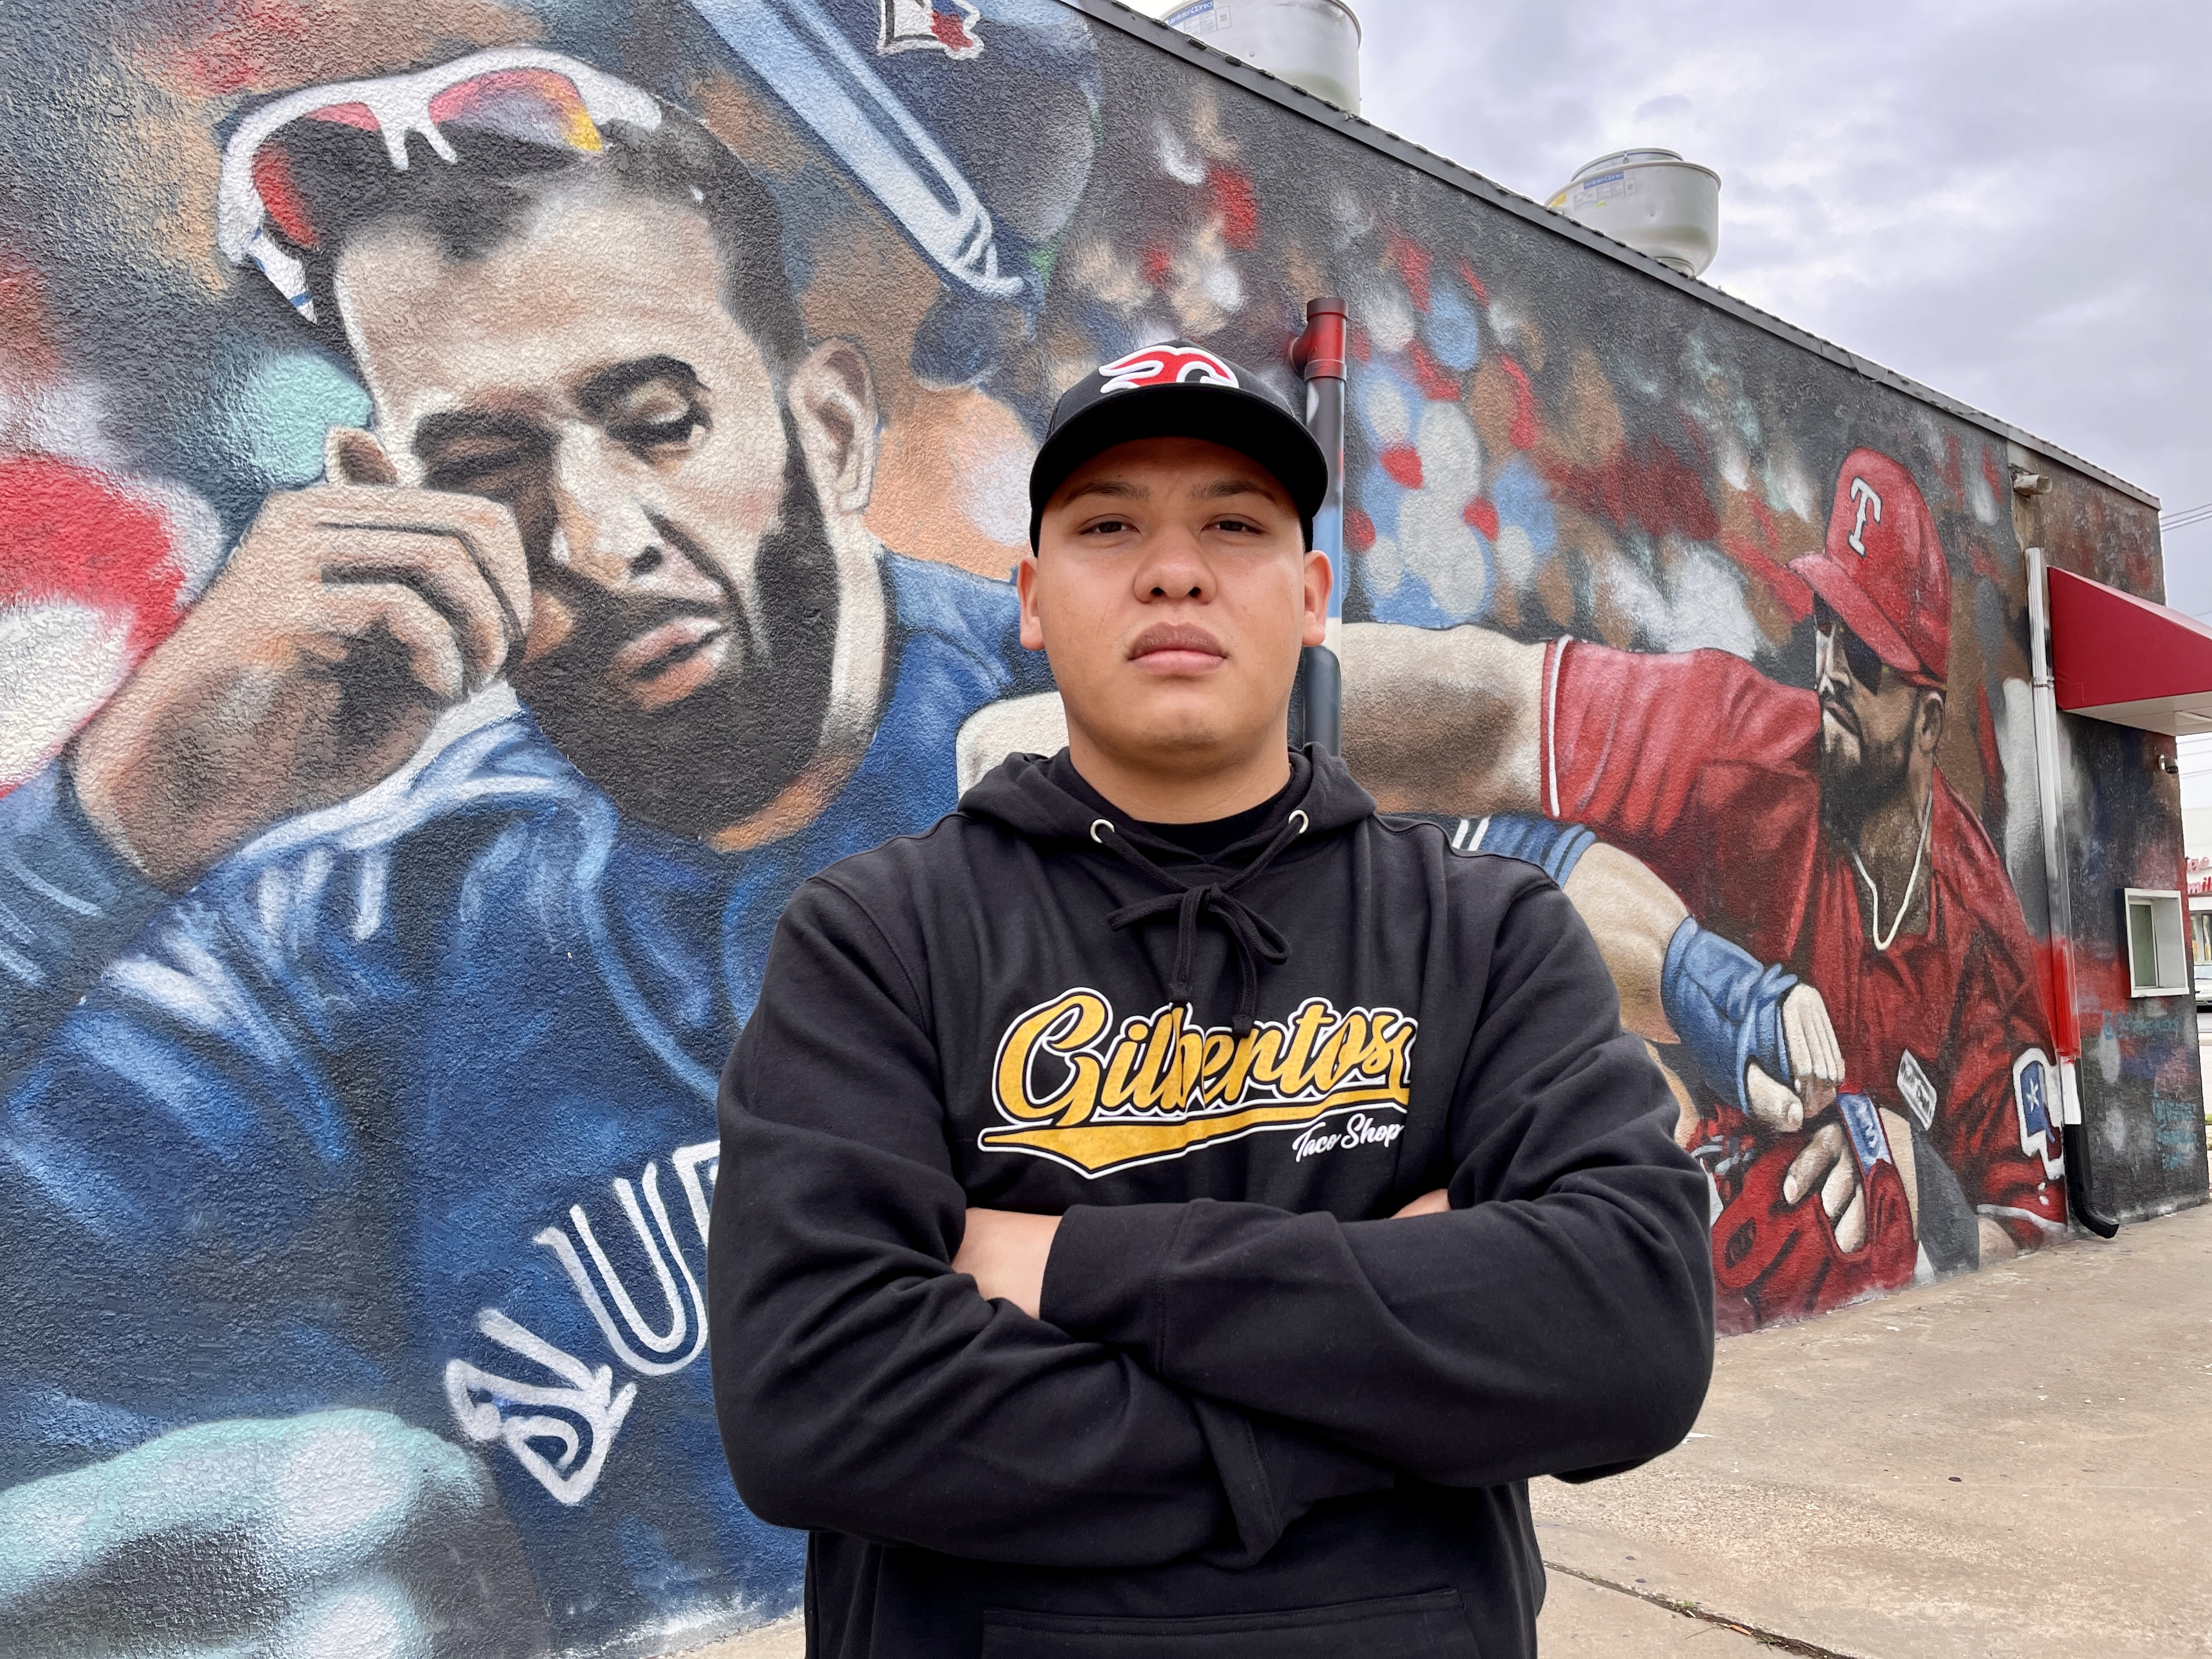 Arlington taco shop's mural of infamous Texas Rangers fight can stay, for  now